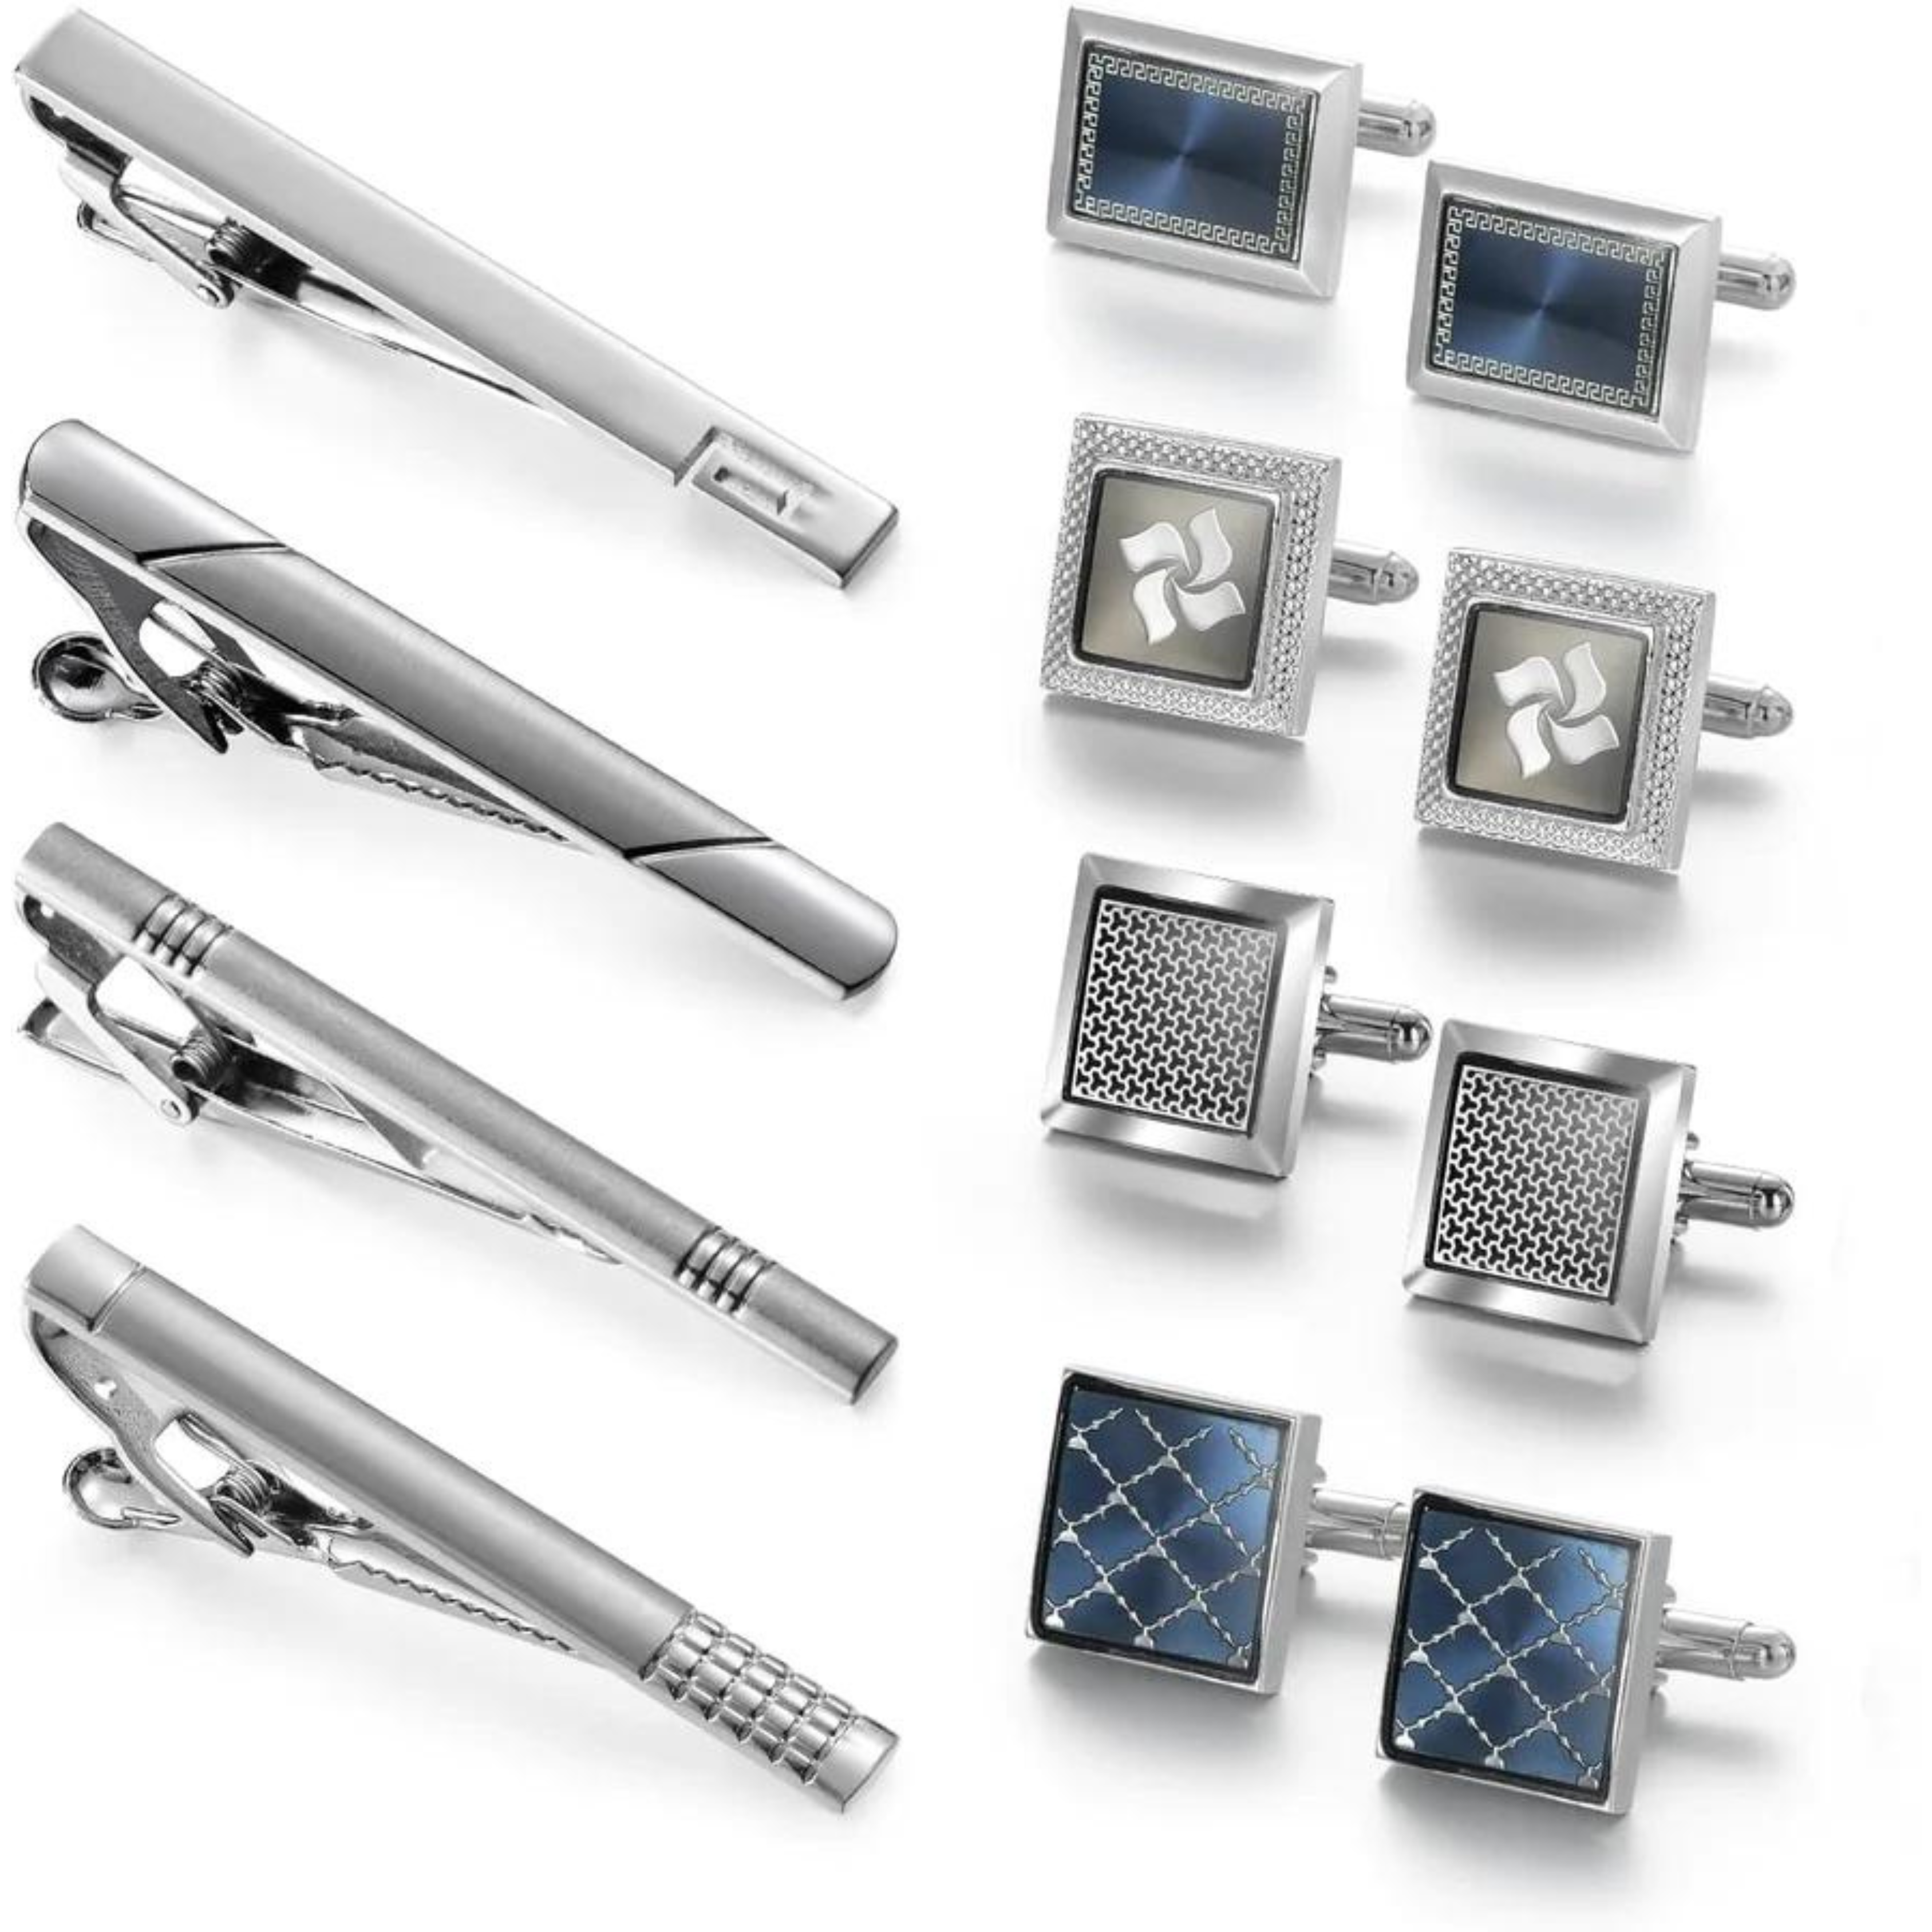 wynameleri Men's Cufflink and Tie Clip Set Fashion Designs with Luxury Gift Box for Party Business Wedding or Various Occasion